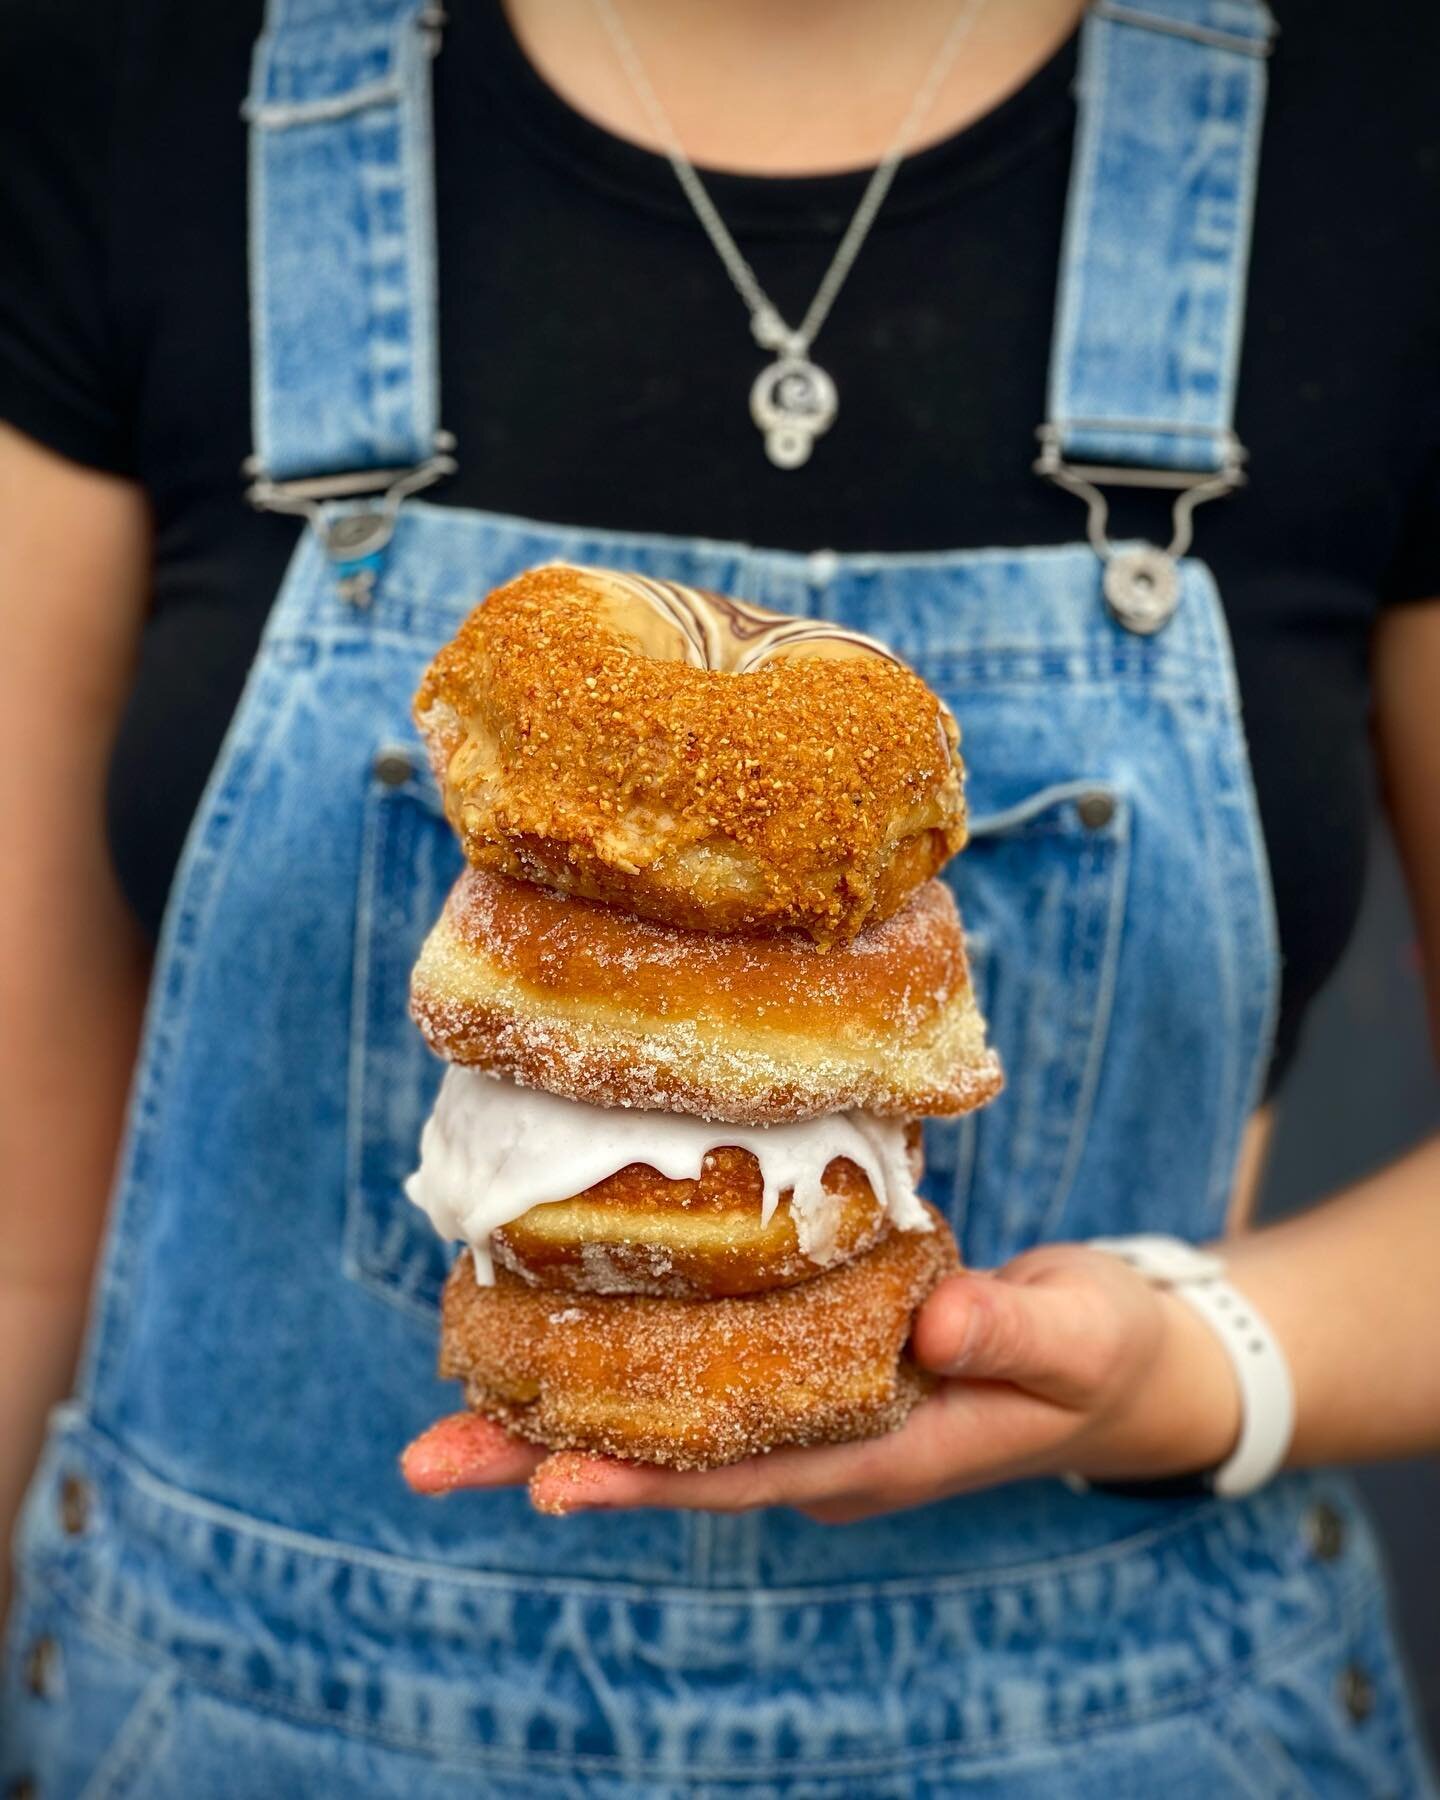 What ring are you choosing?? And we&rsquo;re not talking about the one that goes on your finger 💍😜🍩
&bull;
Comment below which kinda ring you&rsquo;re into? 😉 
&bull;
#bigwigsbakery #bakery #doughnut #glazed #cinnamon #sugar #praline #doughnuts🍩